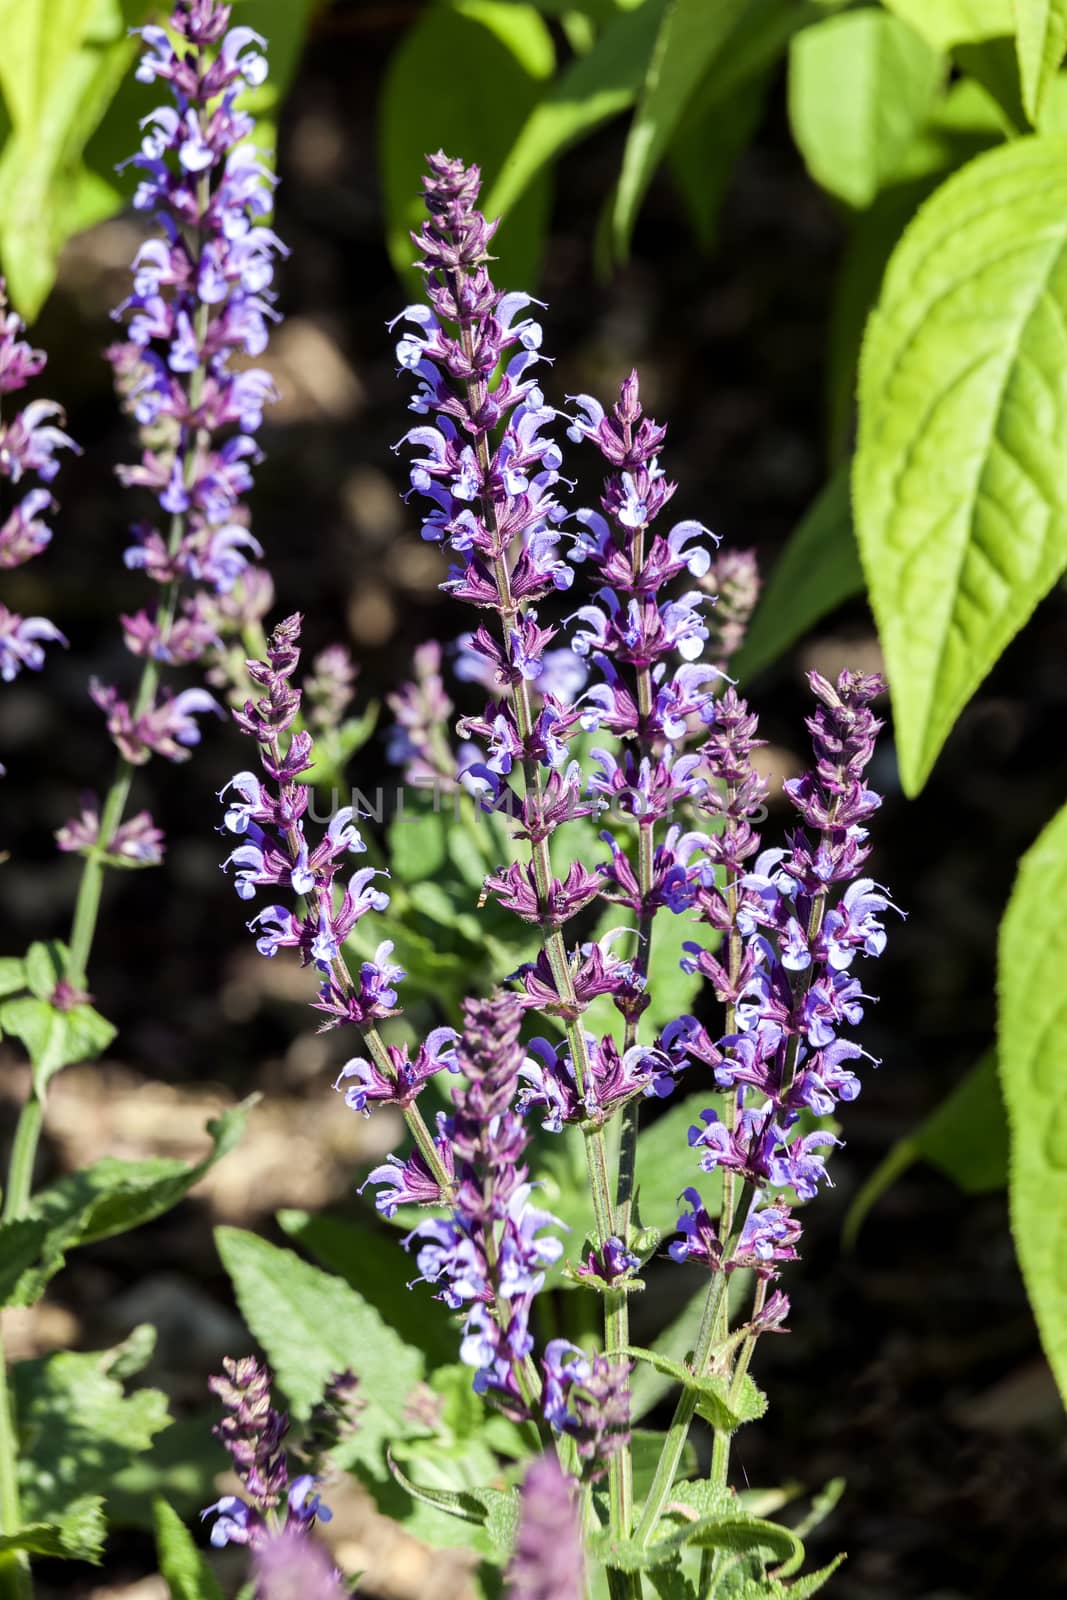 Salvia pratensis 'Indigo' an herbaceous springtime summer flower plant commonly known as clary indigo or meadow sage